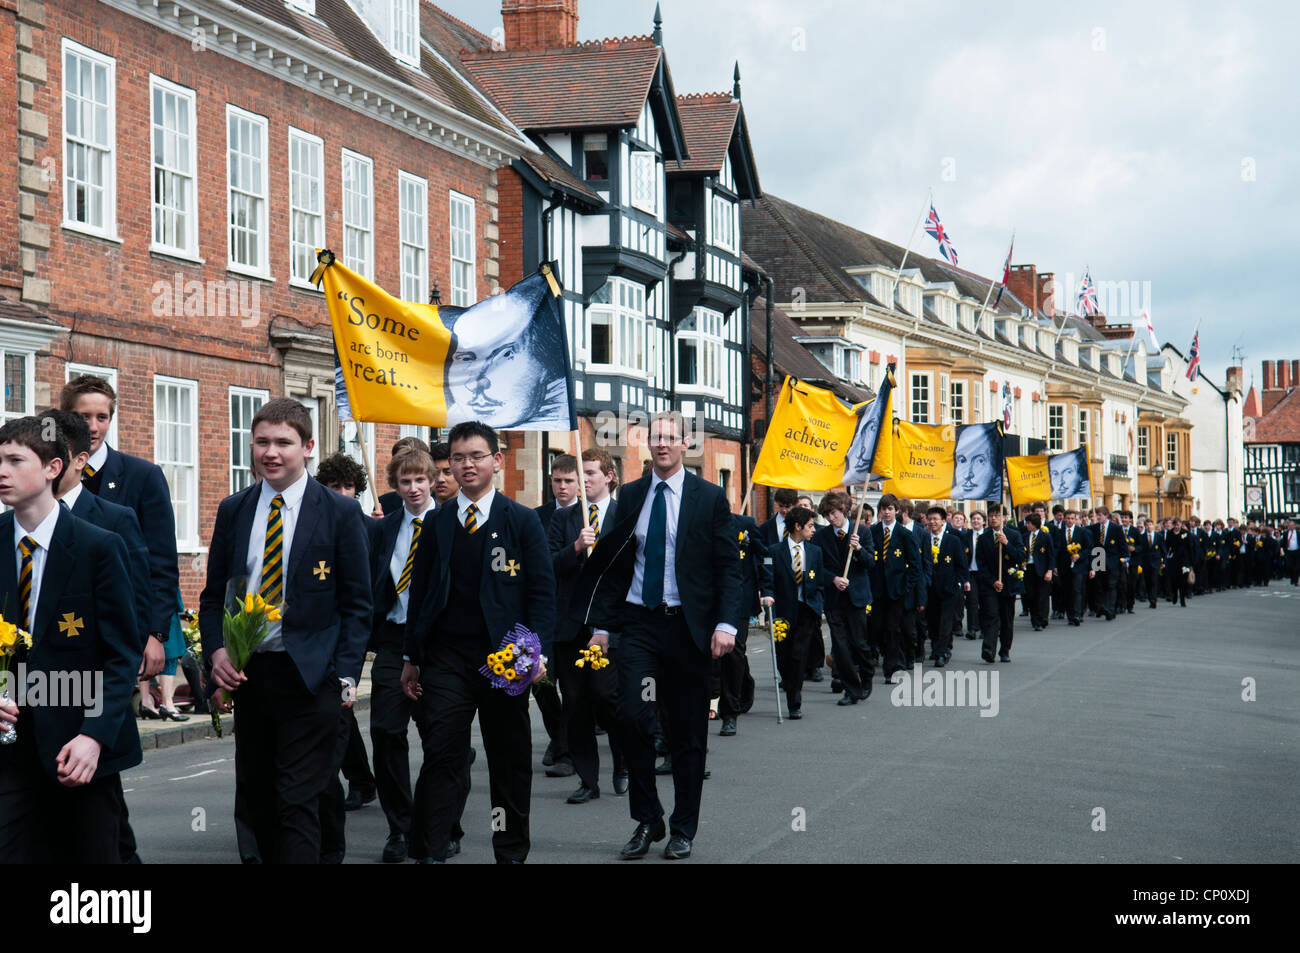 Pupils from King Edward VI School taking part in the William Shakespeare Birthday Procession Stock Photo